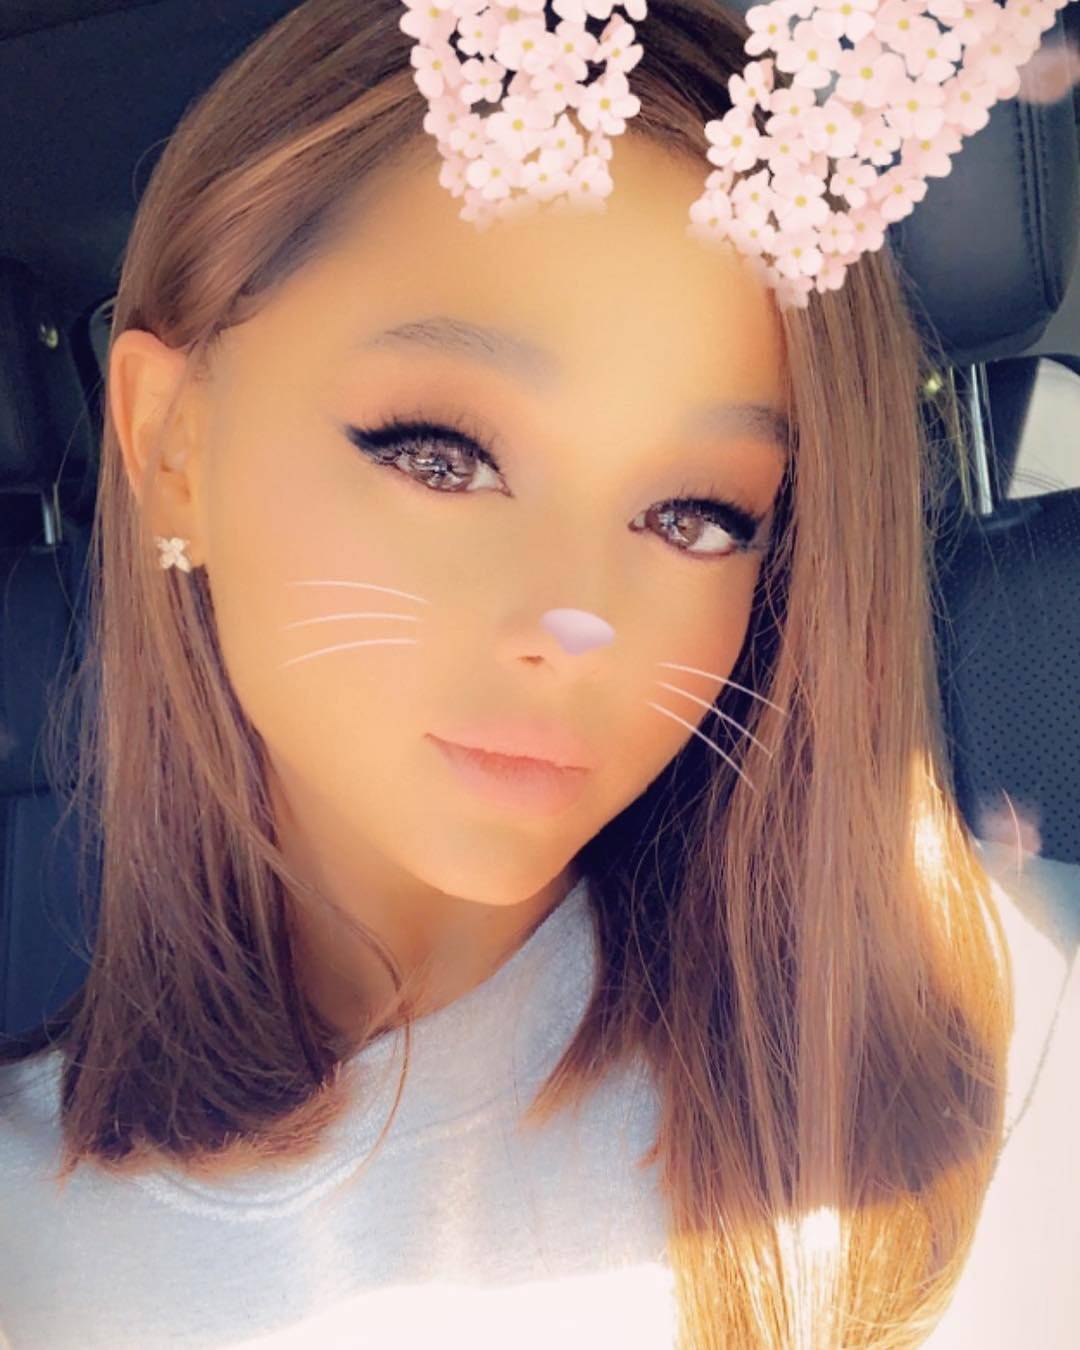 Ariana Grande Cuts Off Ponytail And Debuts A New Look | Electric 94.91080 x 1350